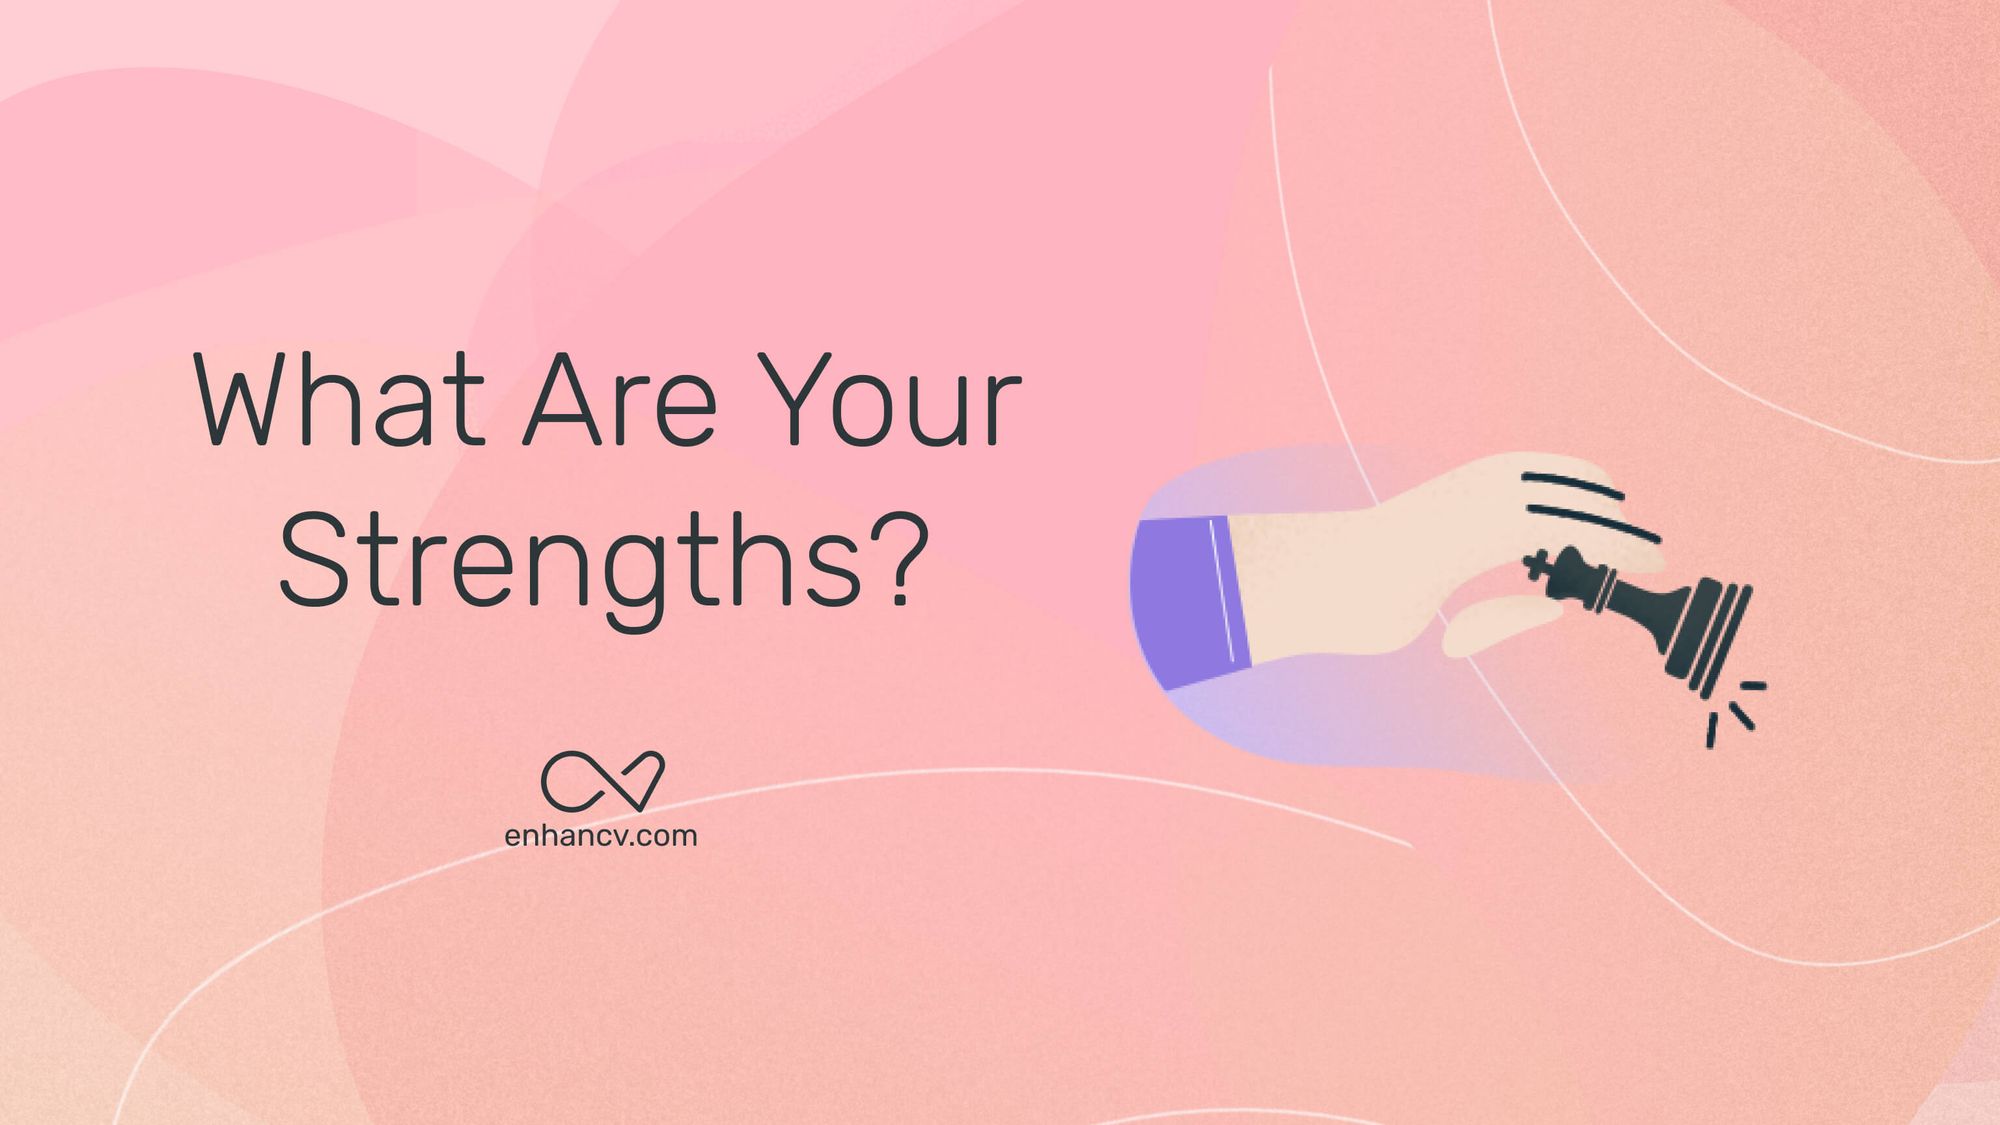 “What Are Your Strengths?”: Easy Answers for this Tough Question (with 6 Bonus Examples)